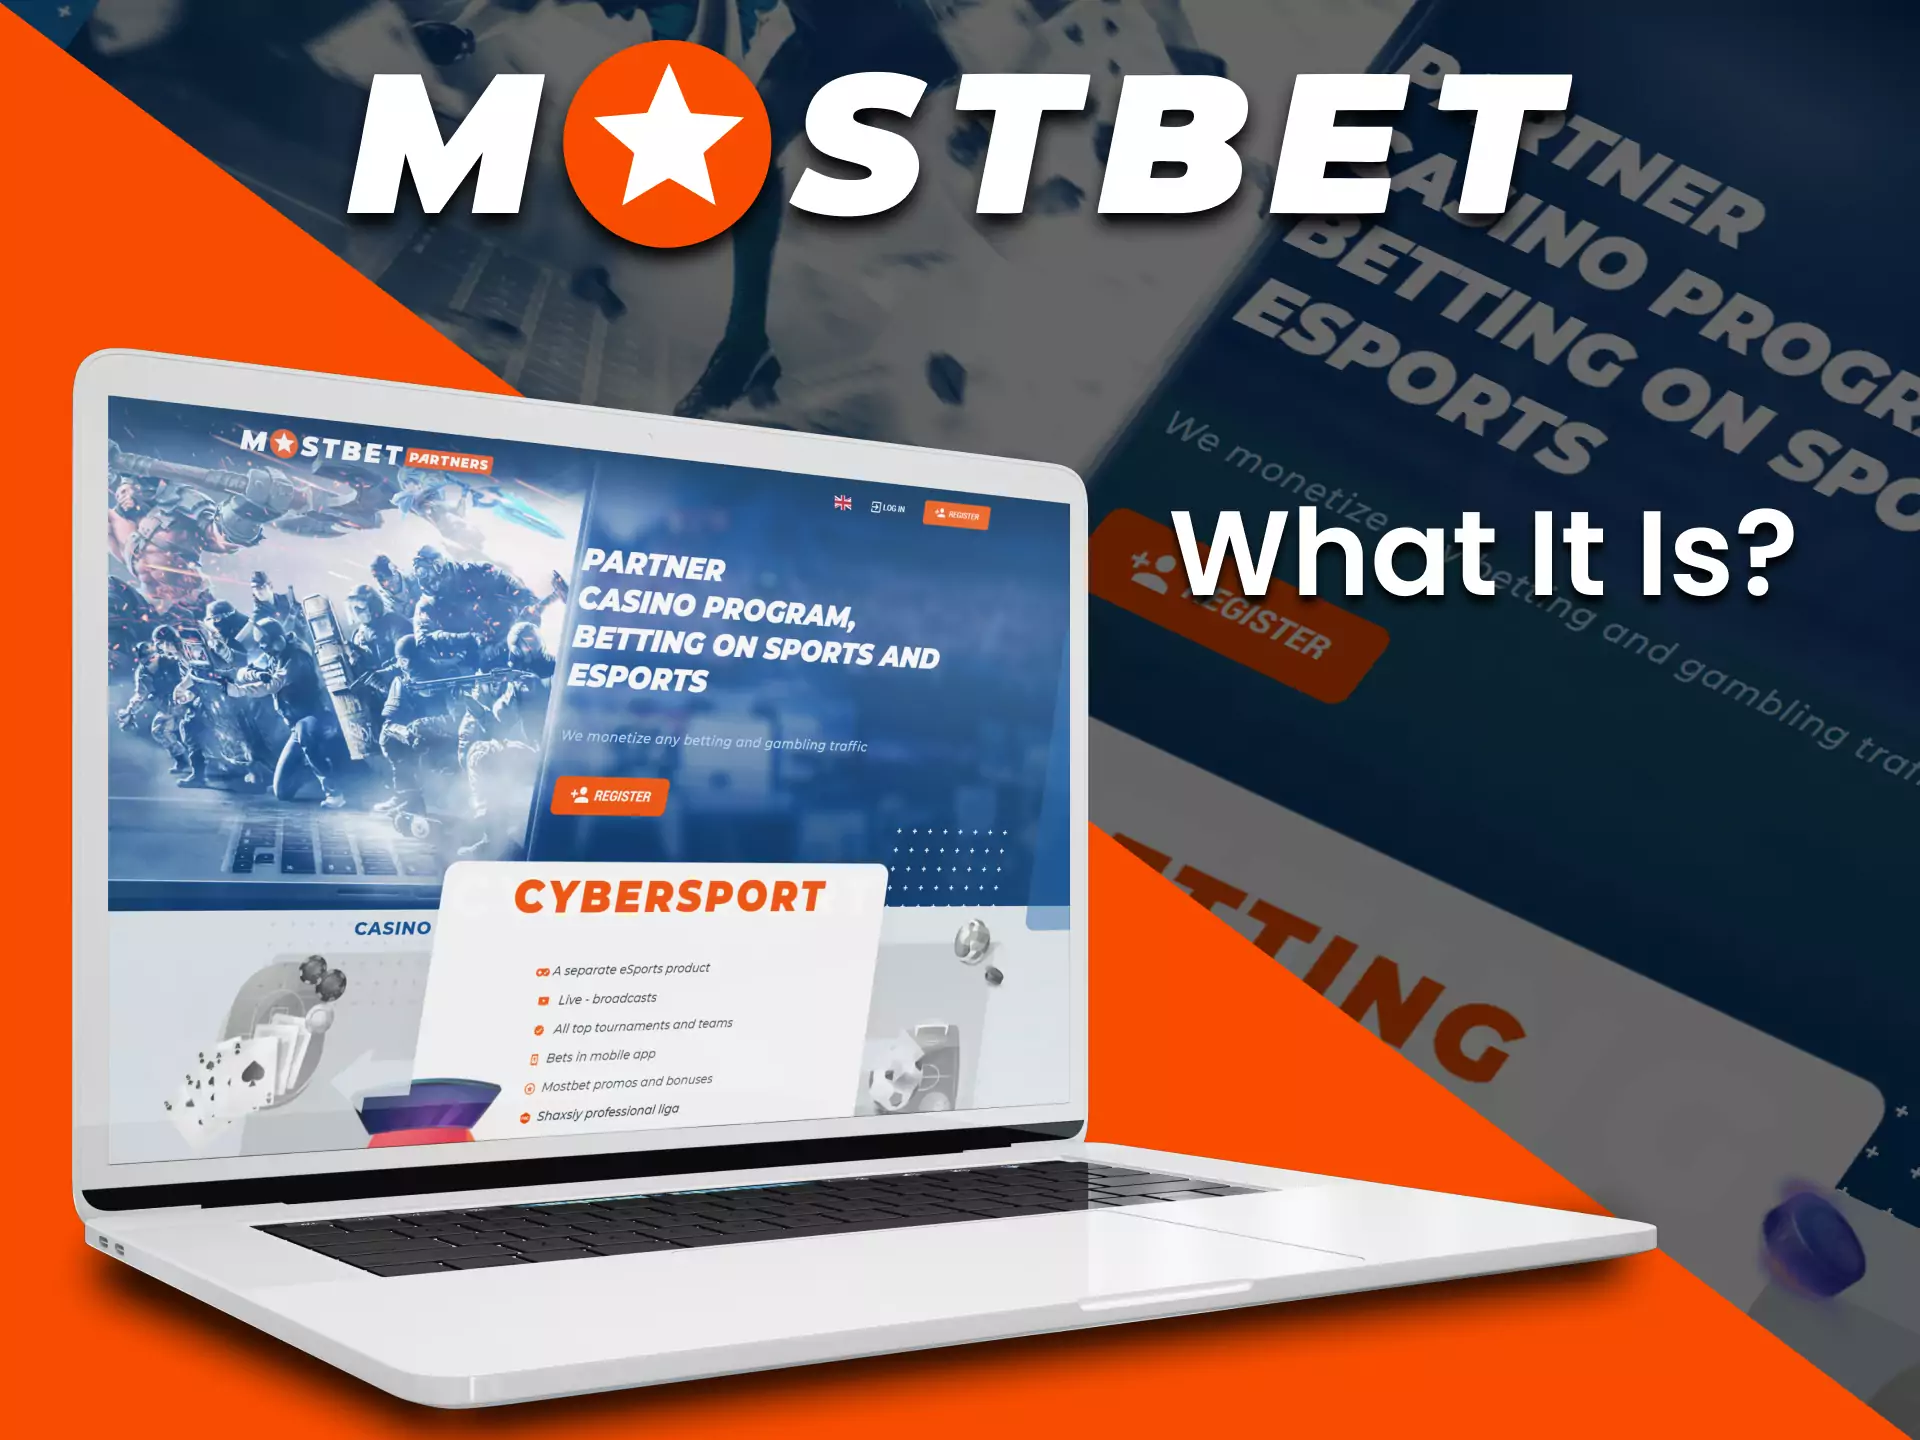 How To Make Your Mostbet registration Look Like A Million Bucks